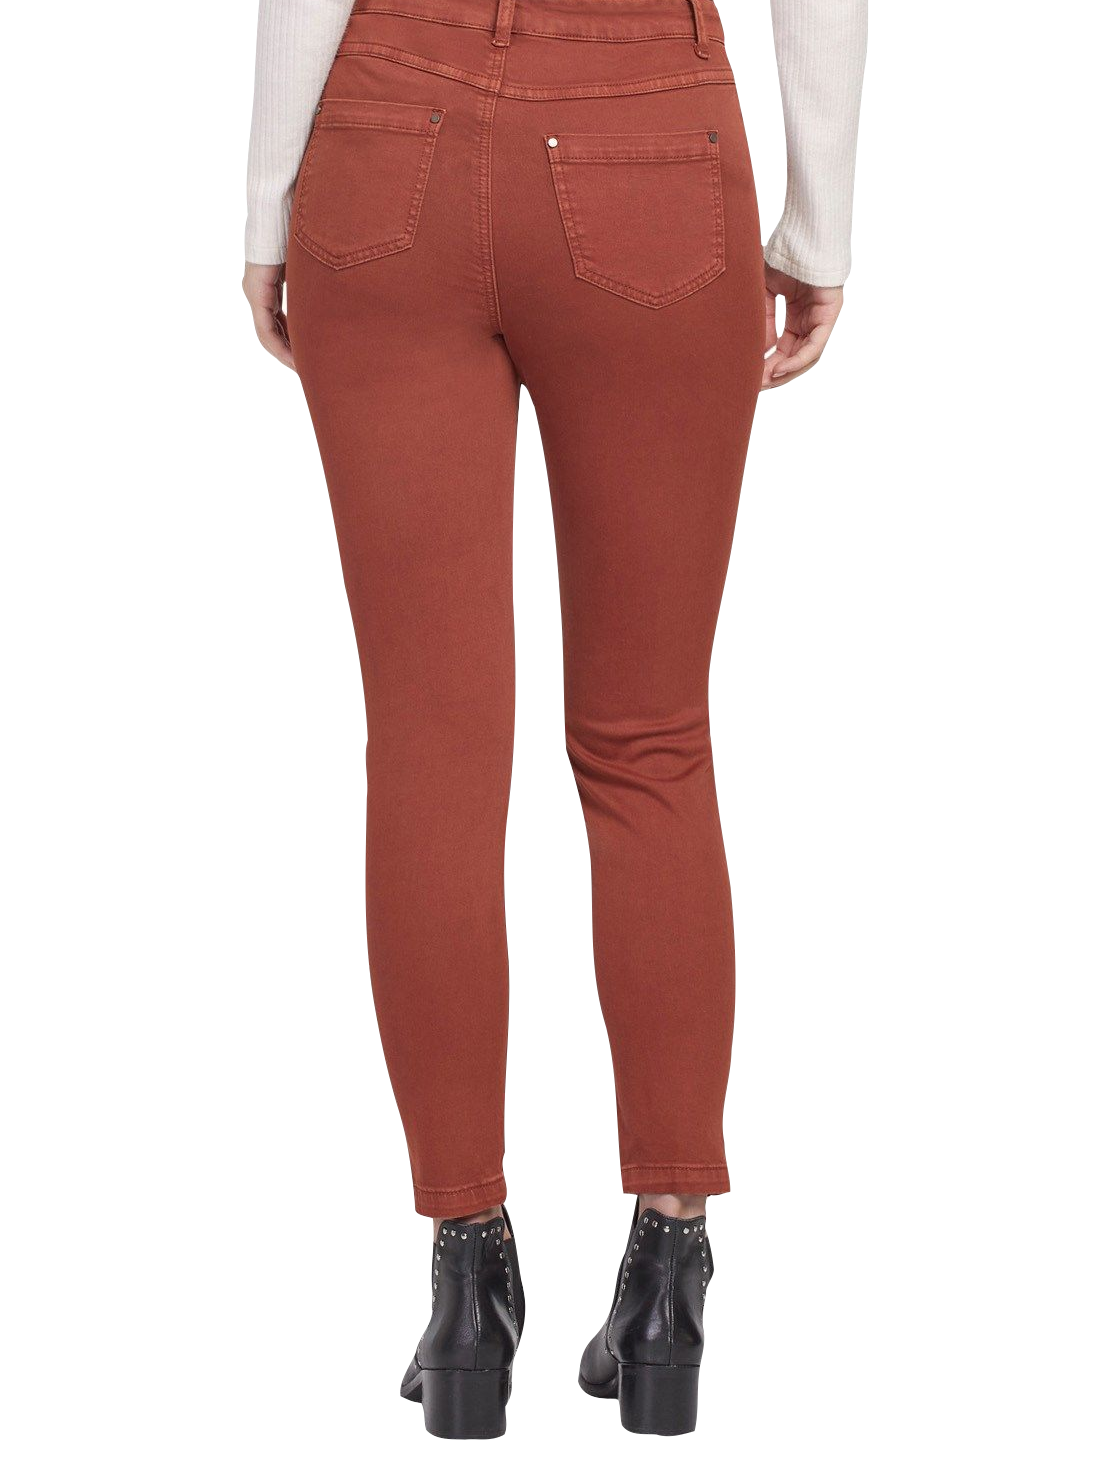 Back of Tribal Pull-On Twill Ankle Jegging in Tawny color